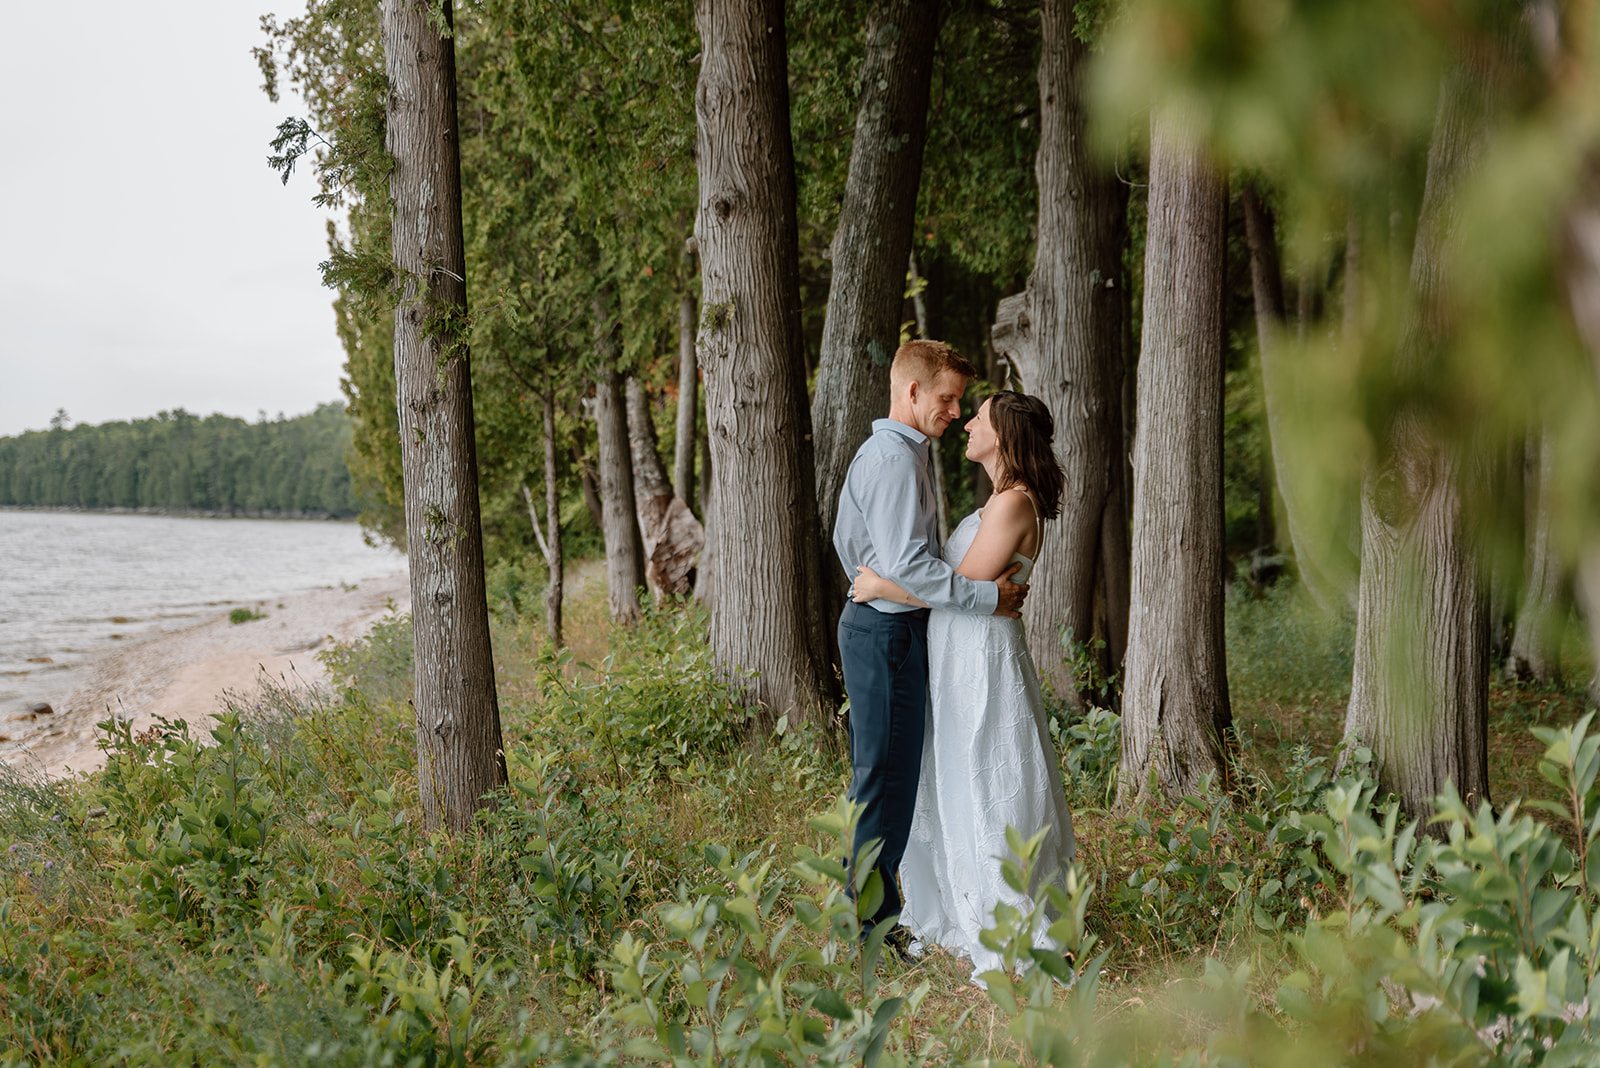 Exchanging private vows among the cedar trees on the shore of Lake Michigan at Bjorklunden in Baileys Harbor, WI